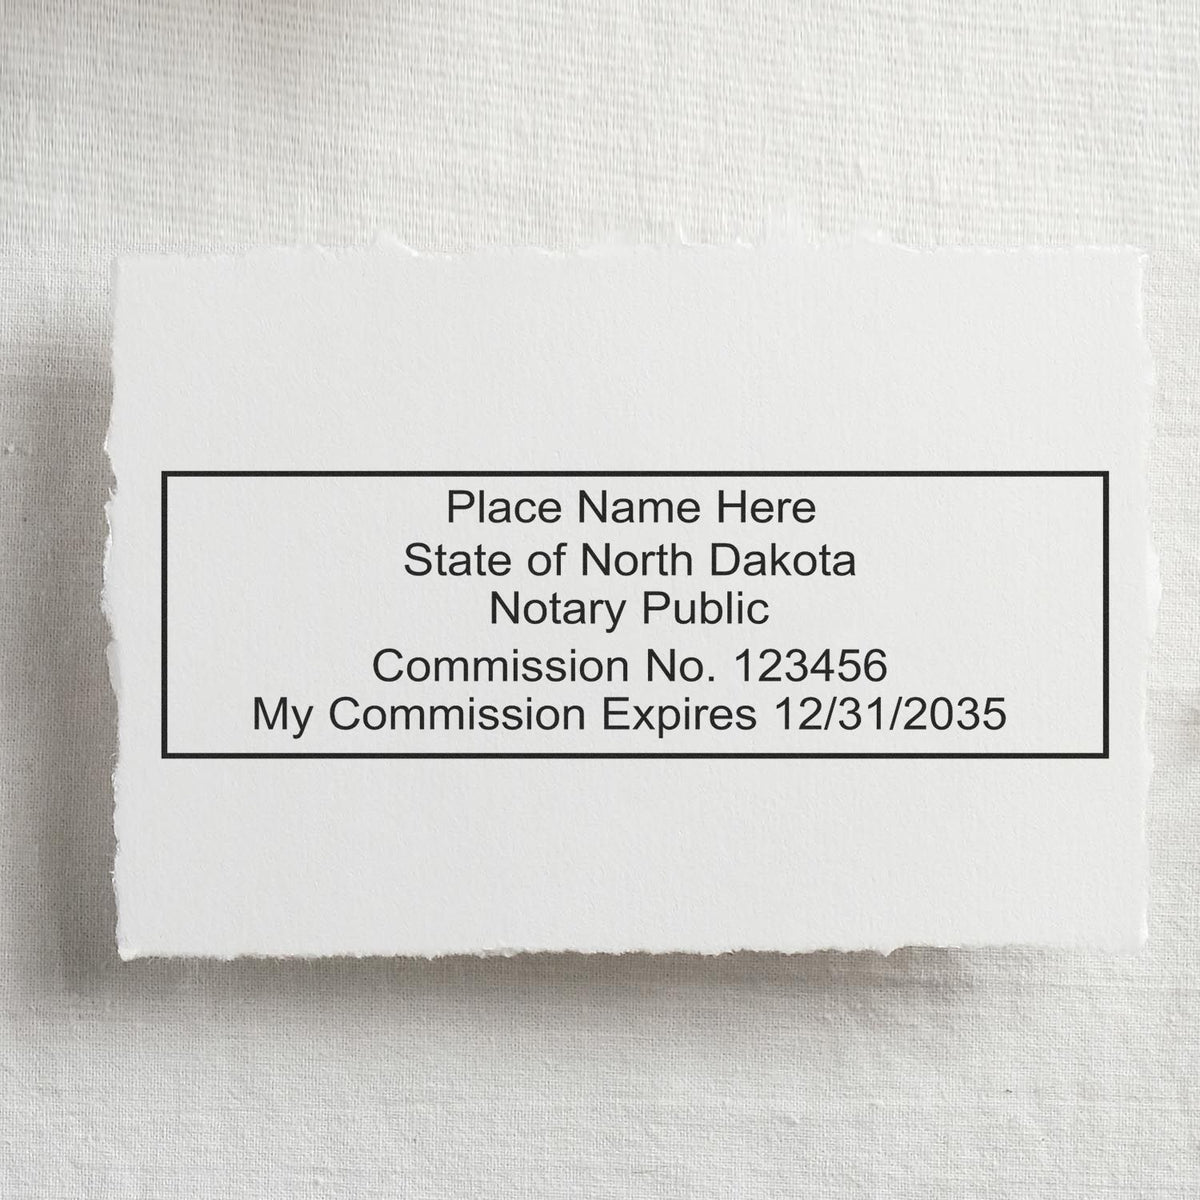 Another Example of a stamped impression of the Heavy-Duty North Dakota Rectangular Notary Stamp on a piece of office paper.